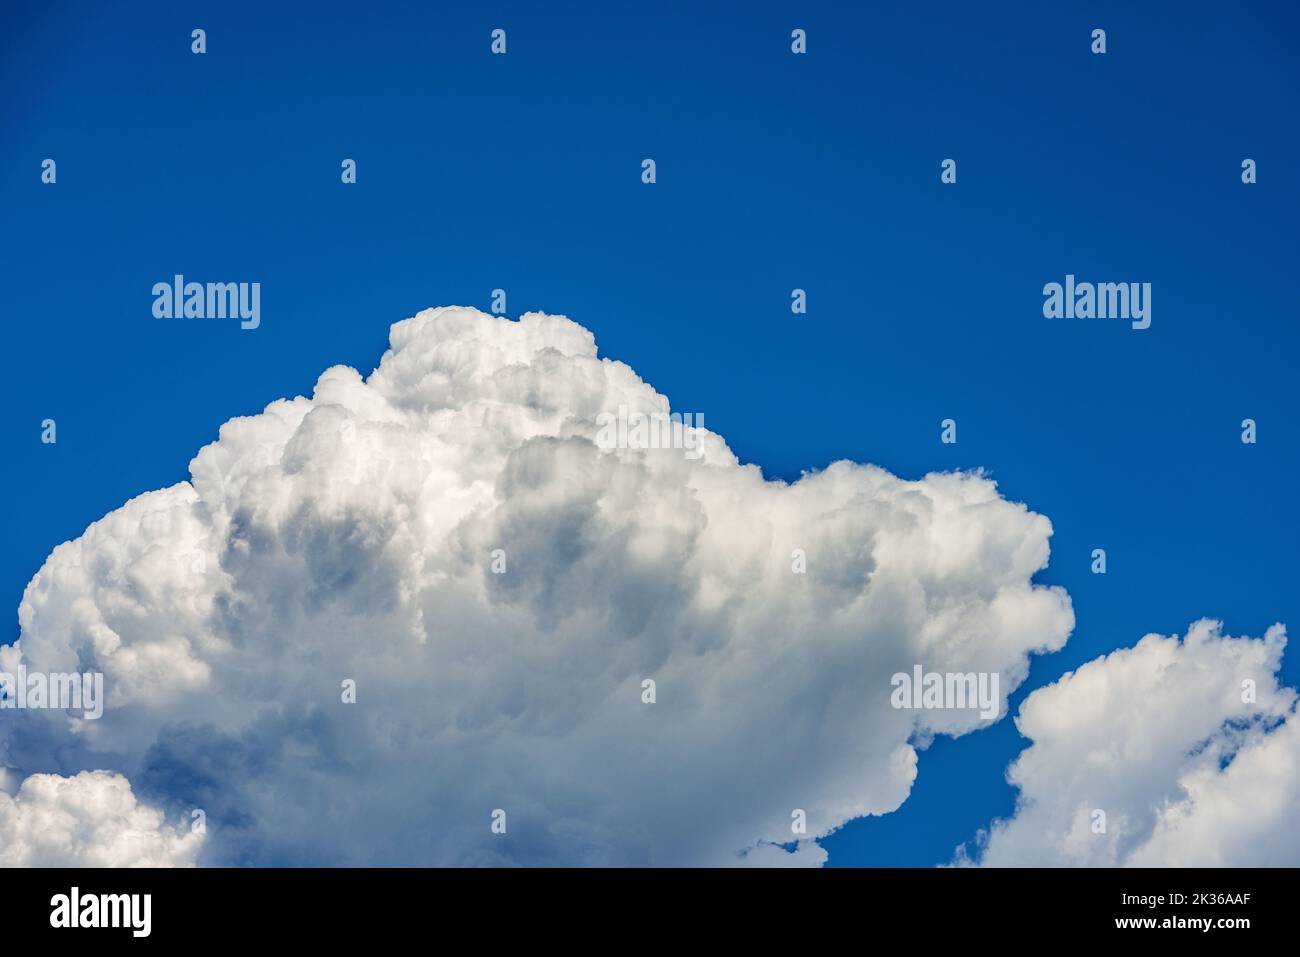 Photography of beautiful storm clouds, cumulus clouds or cumulonimbus against a clear blue sky. Full frame, sky only. Stock Photo